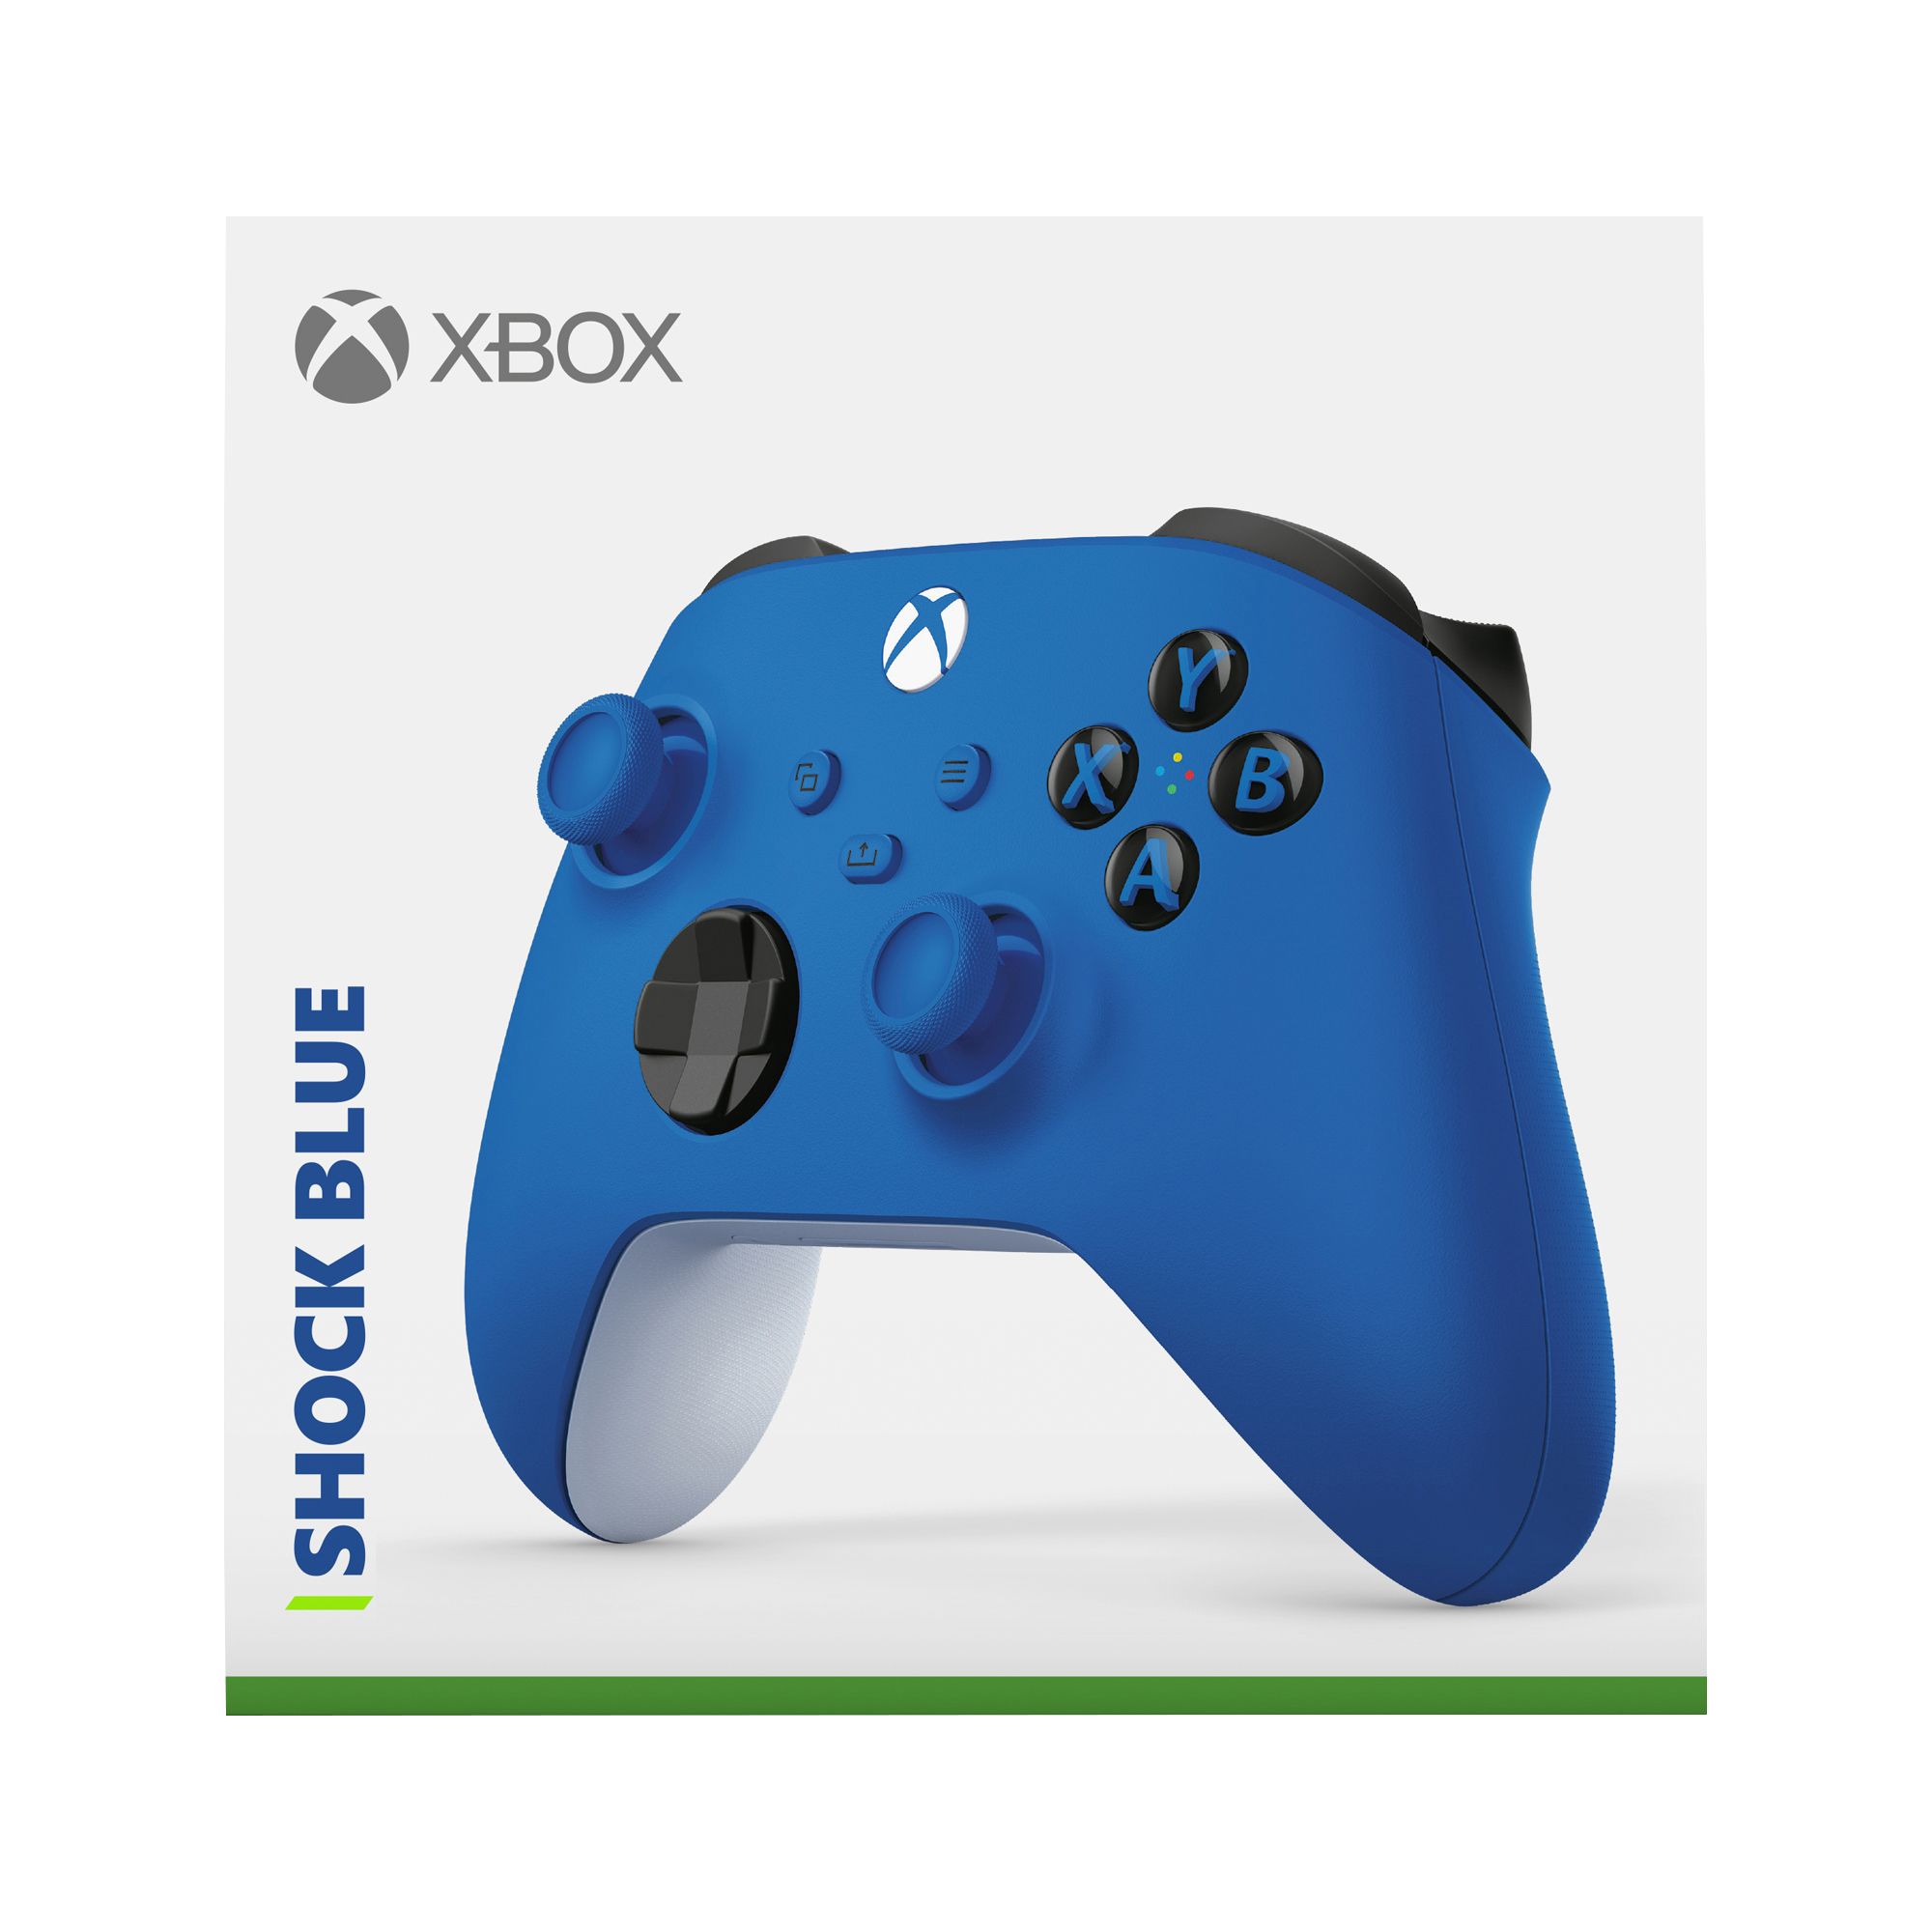 Microsoft Xbox Wireless Controller Carbon Black - Wireless & Bluetooth  Connectivity - New Hybrid D-pad - New Share Button - Featuring Textured  Grip 